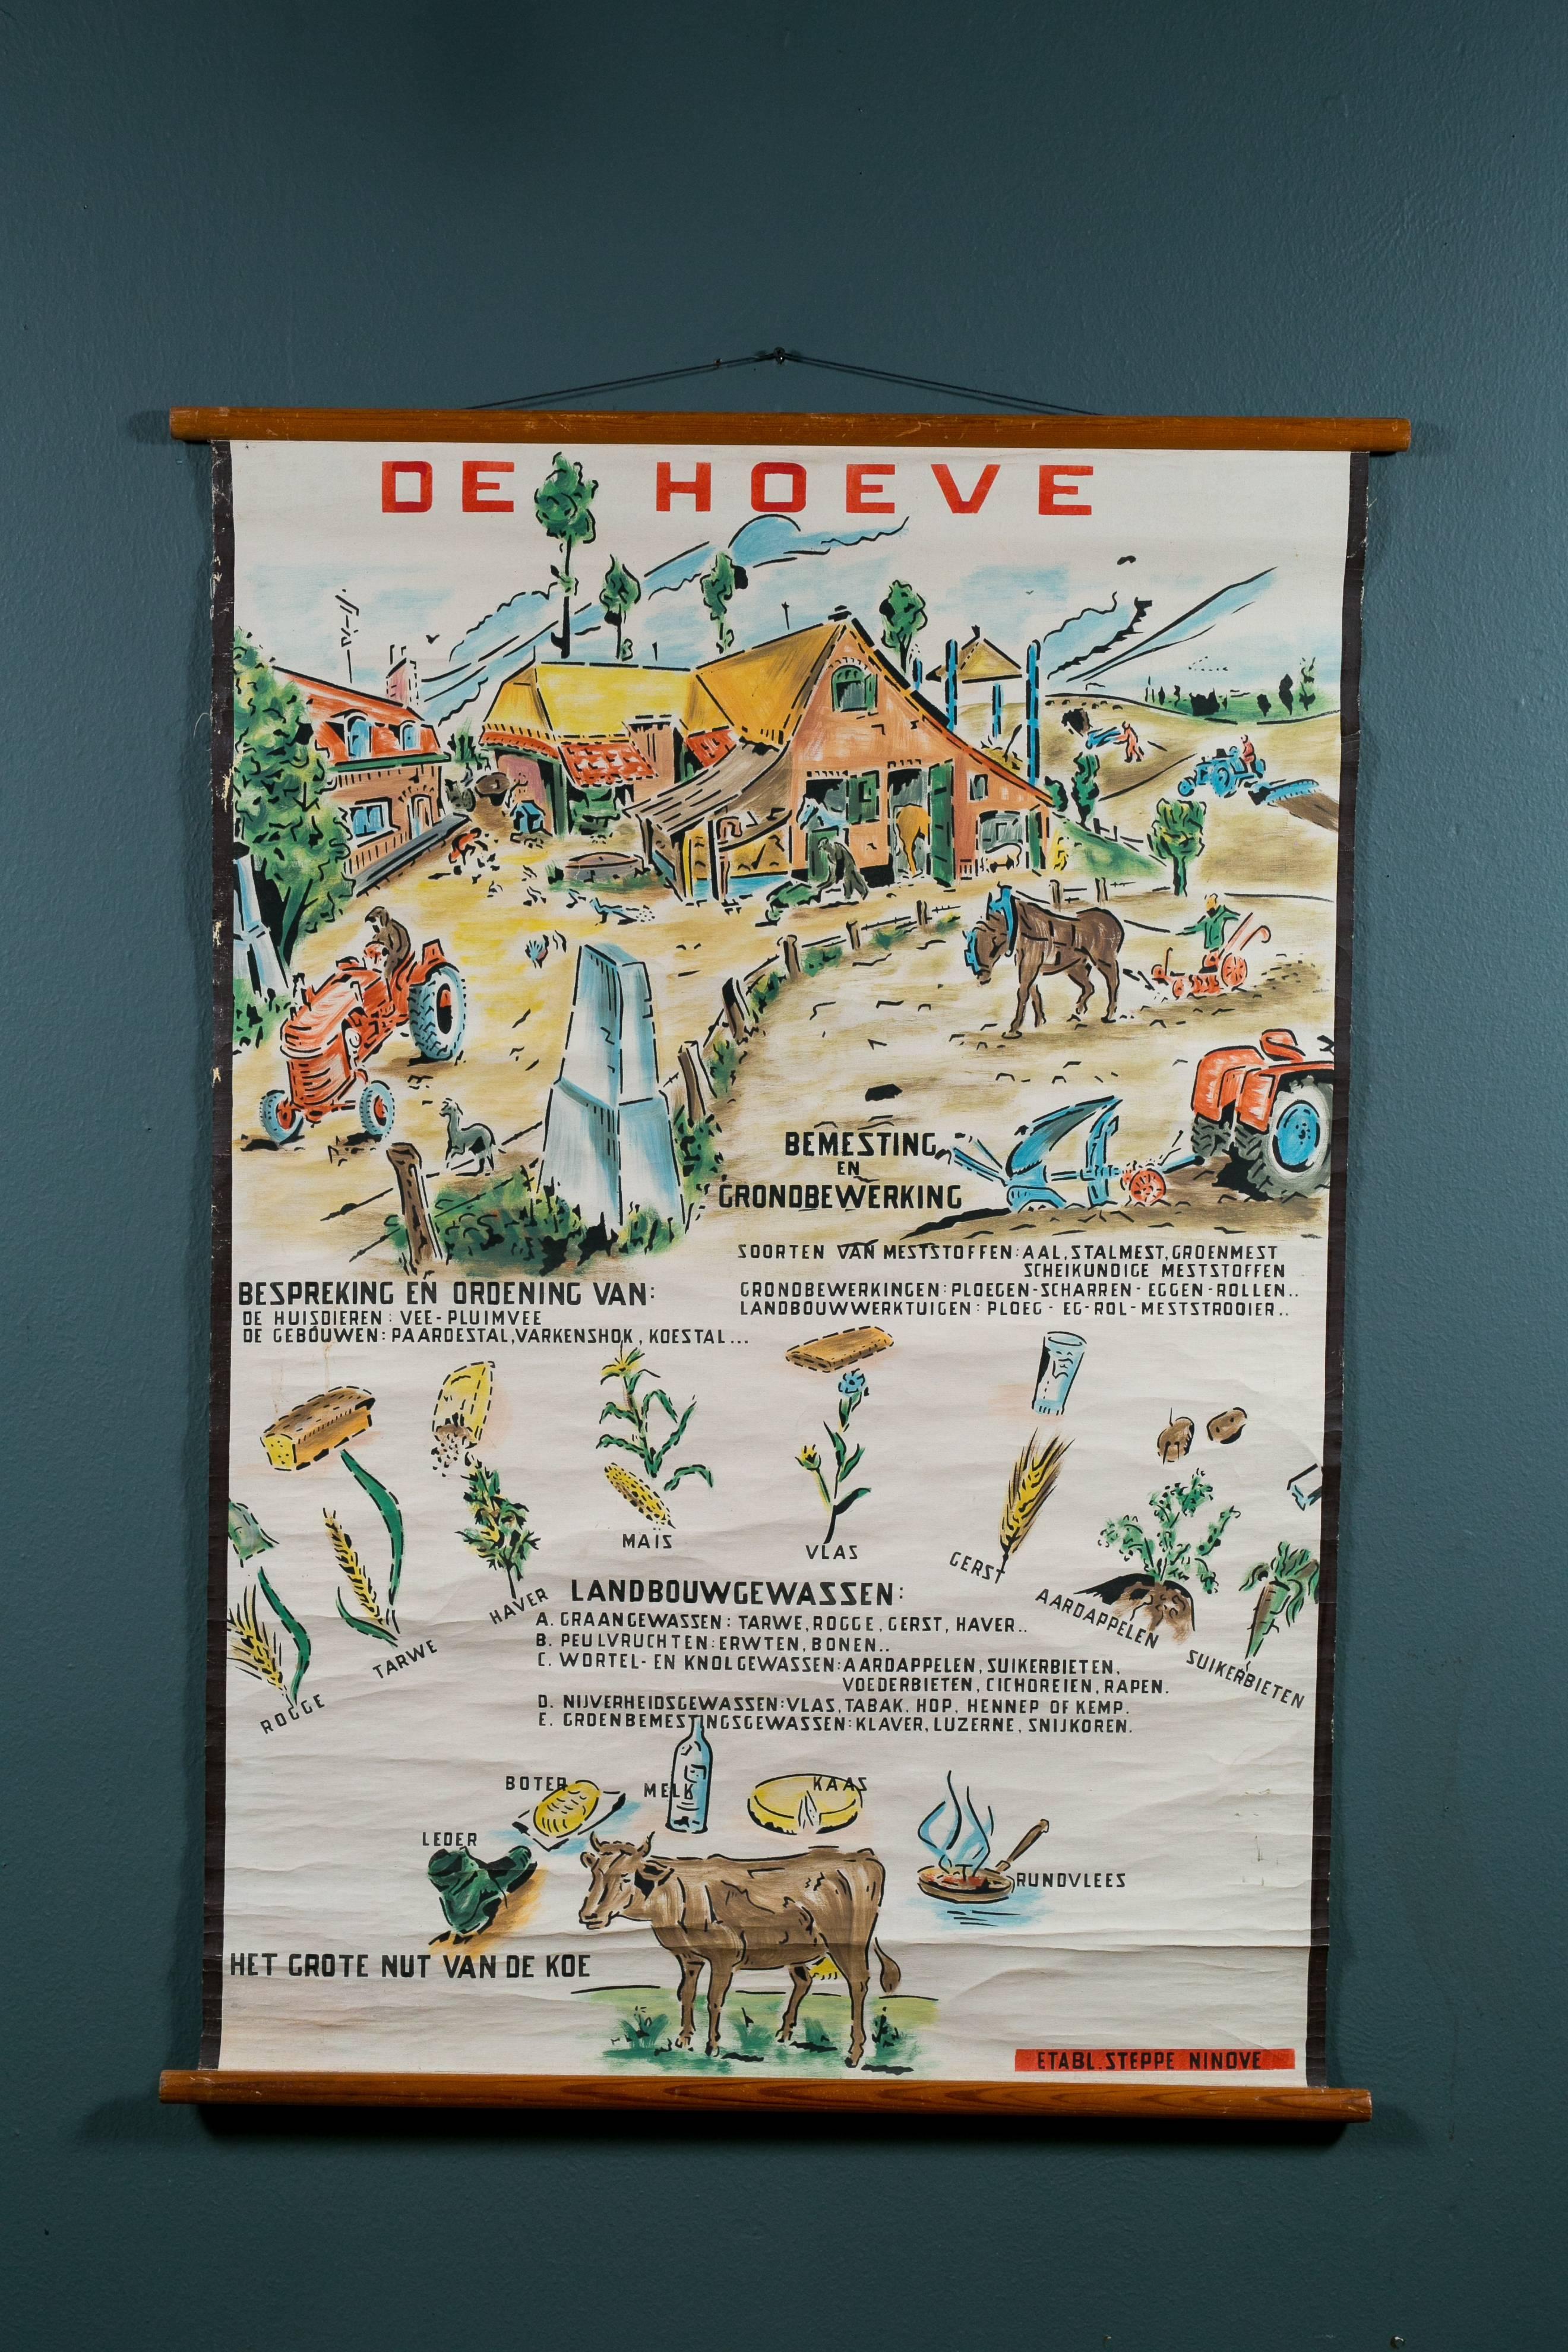 Set of three charming hand-painted wall charts from a Dutch School house. De Beweging shows movement. De Hoeve shows farm produce. Het Water shows water in nature. Paint on canvas with original wooden dowel rods. Price is for the set of three.